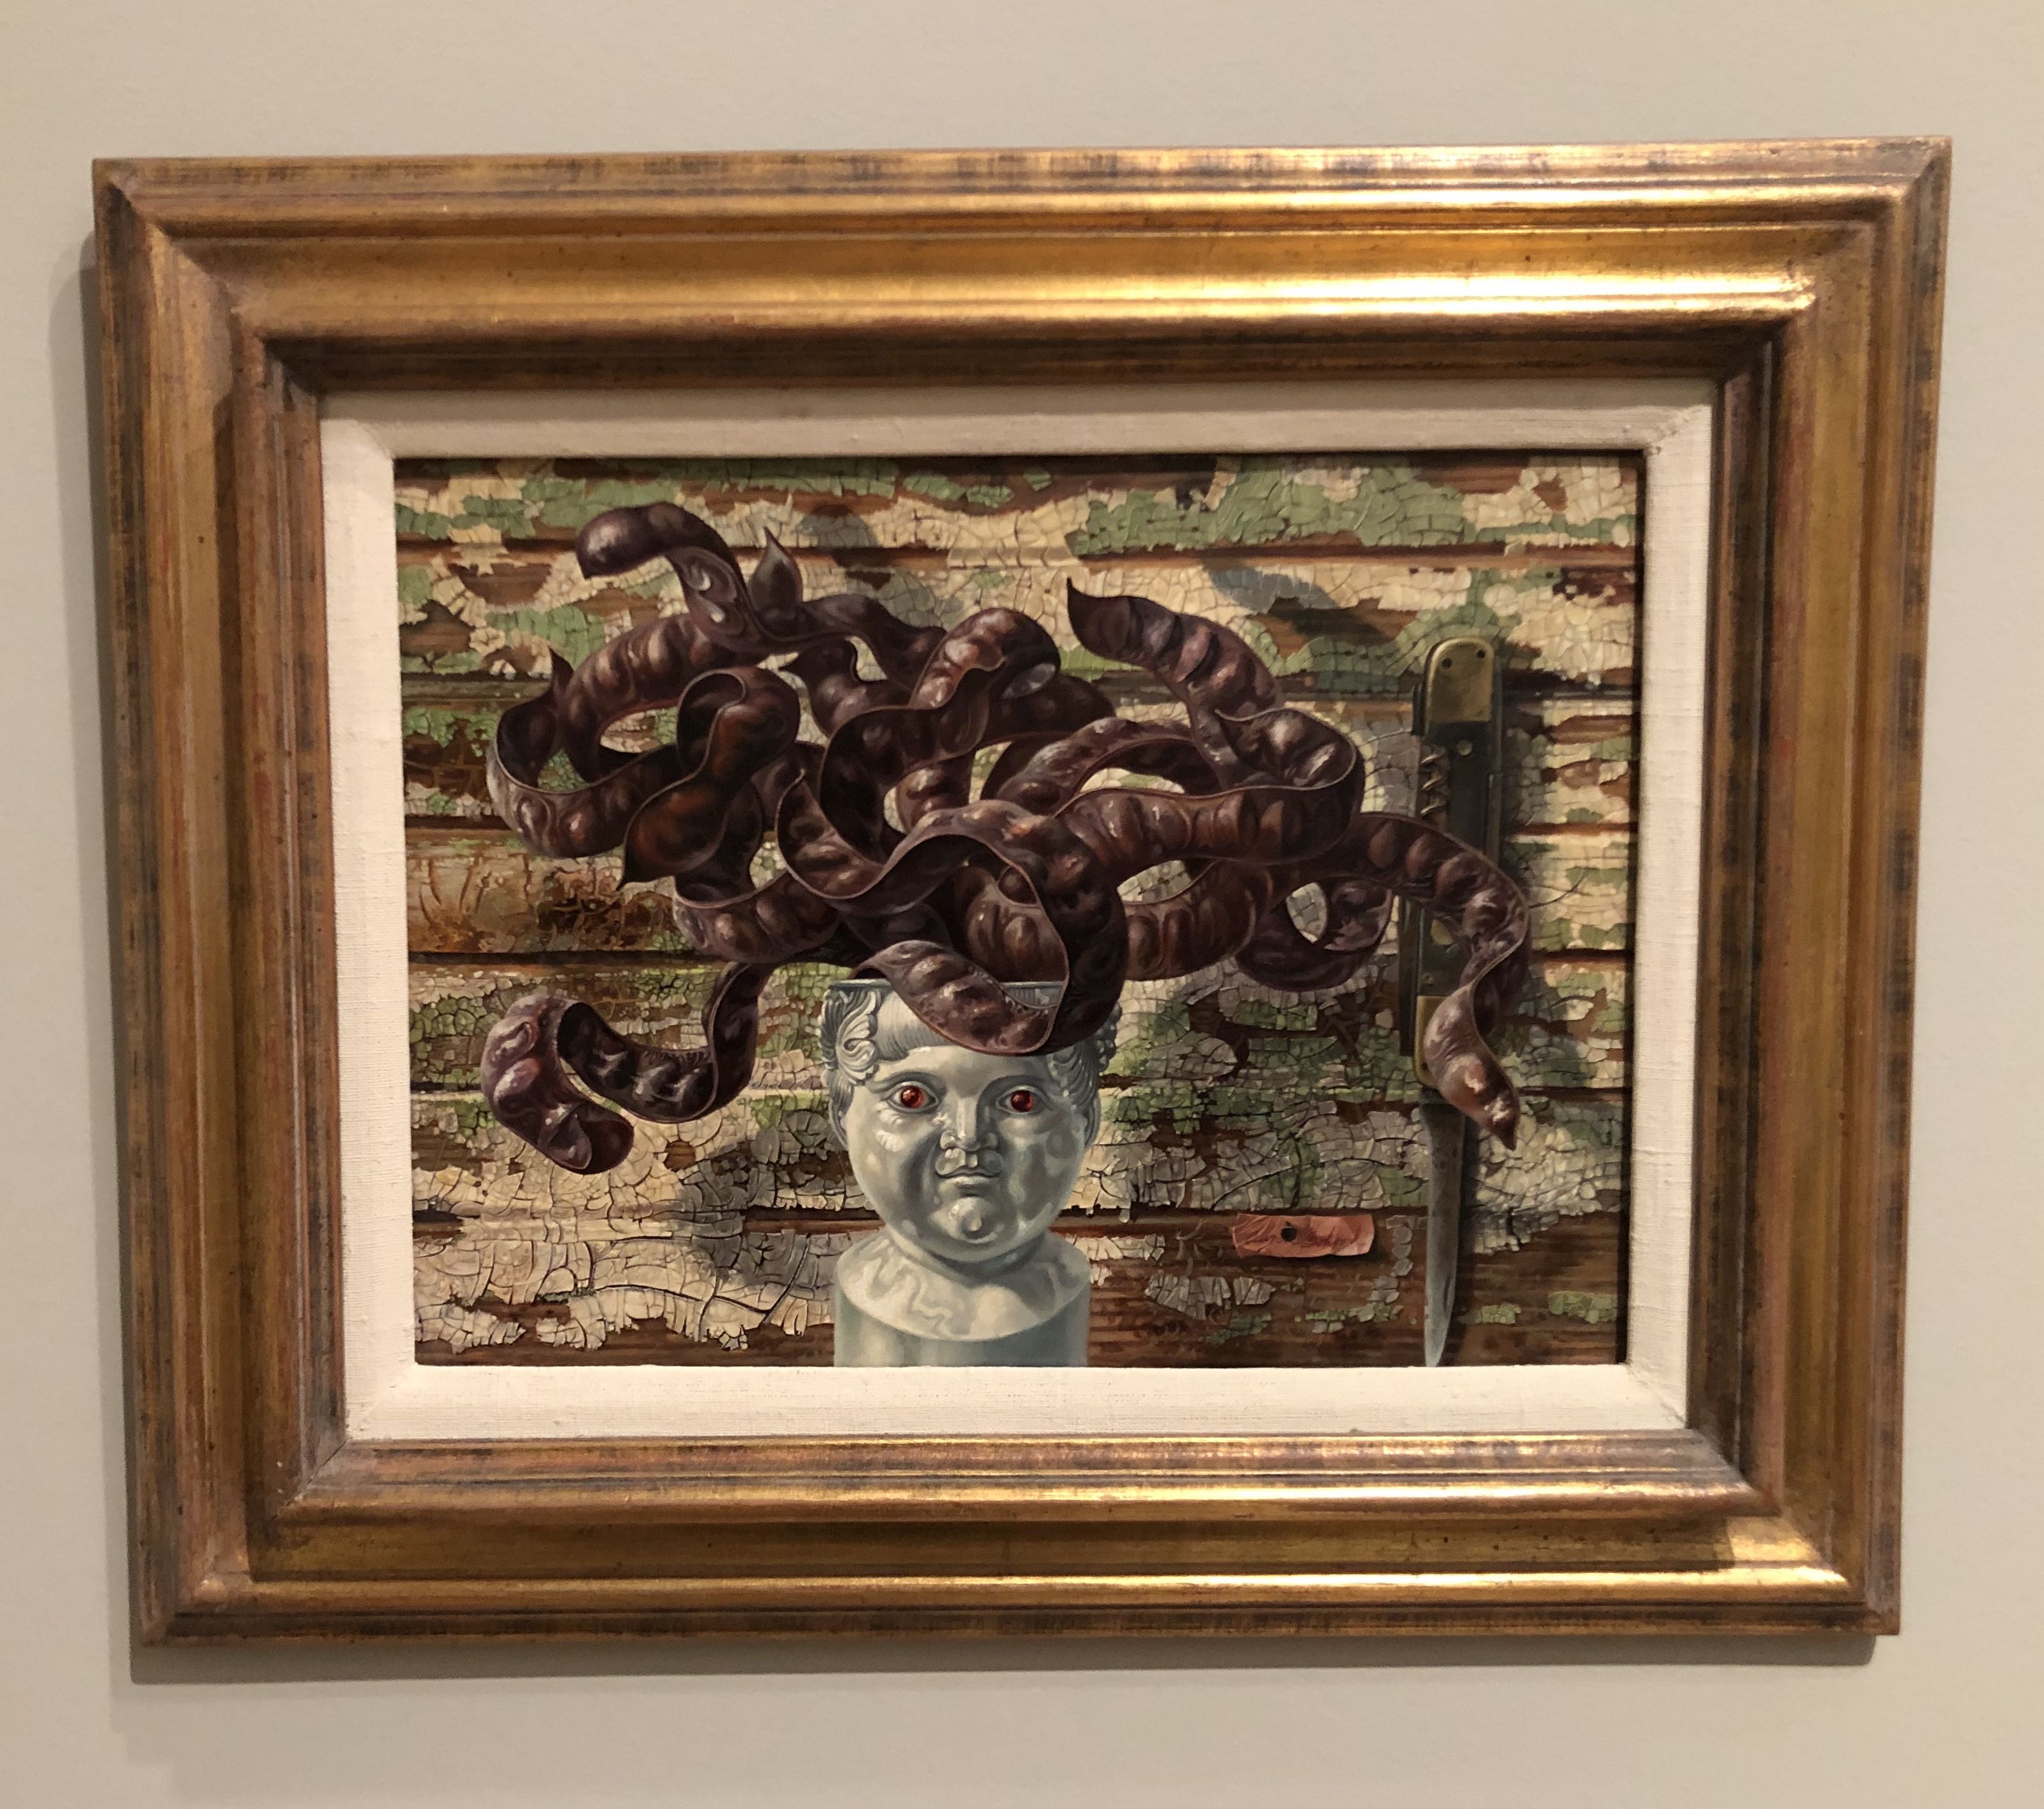 Medusa by Aaron Bohrod at the Chazen Museum of Art.